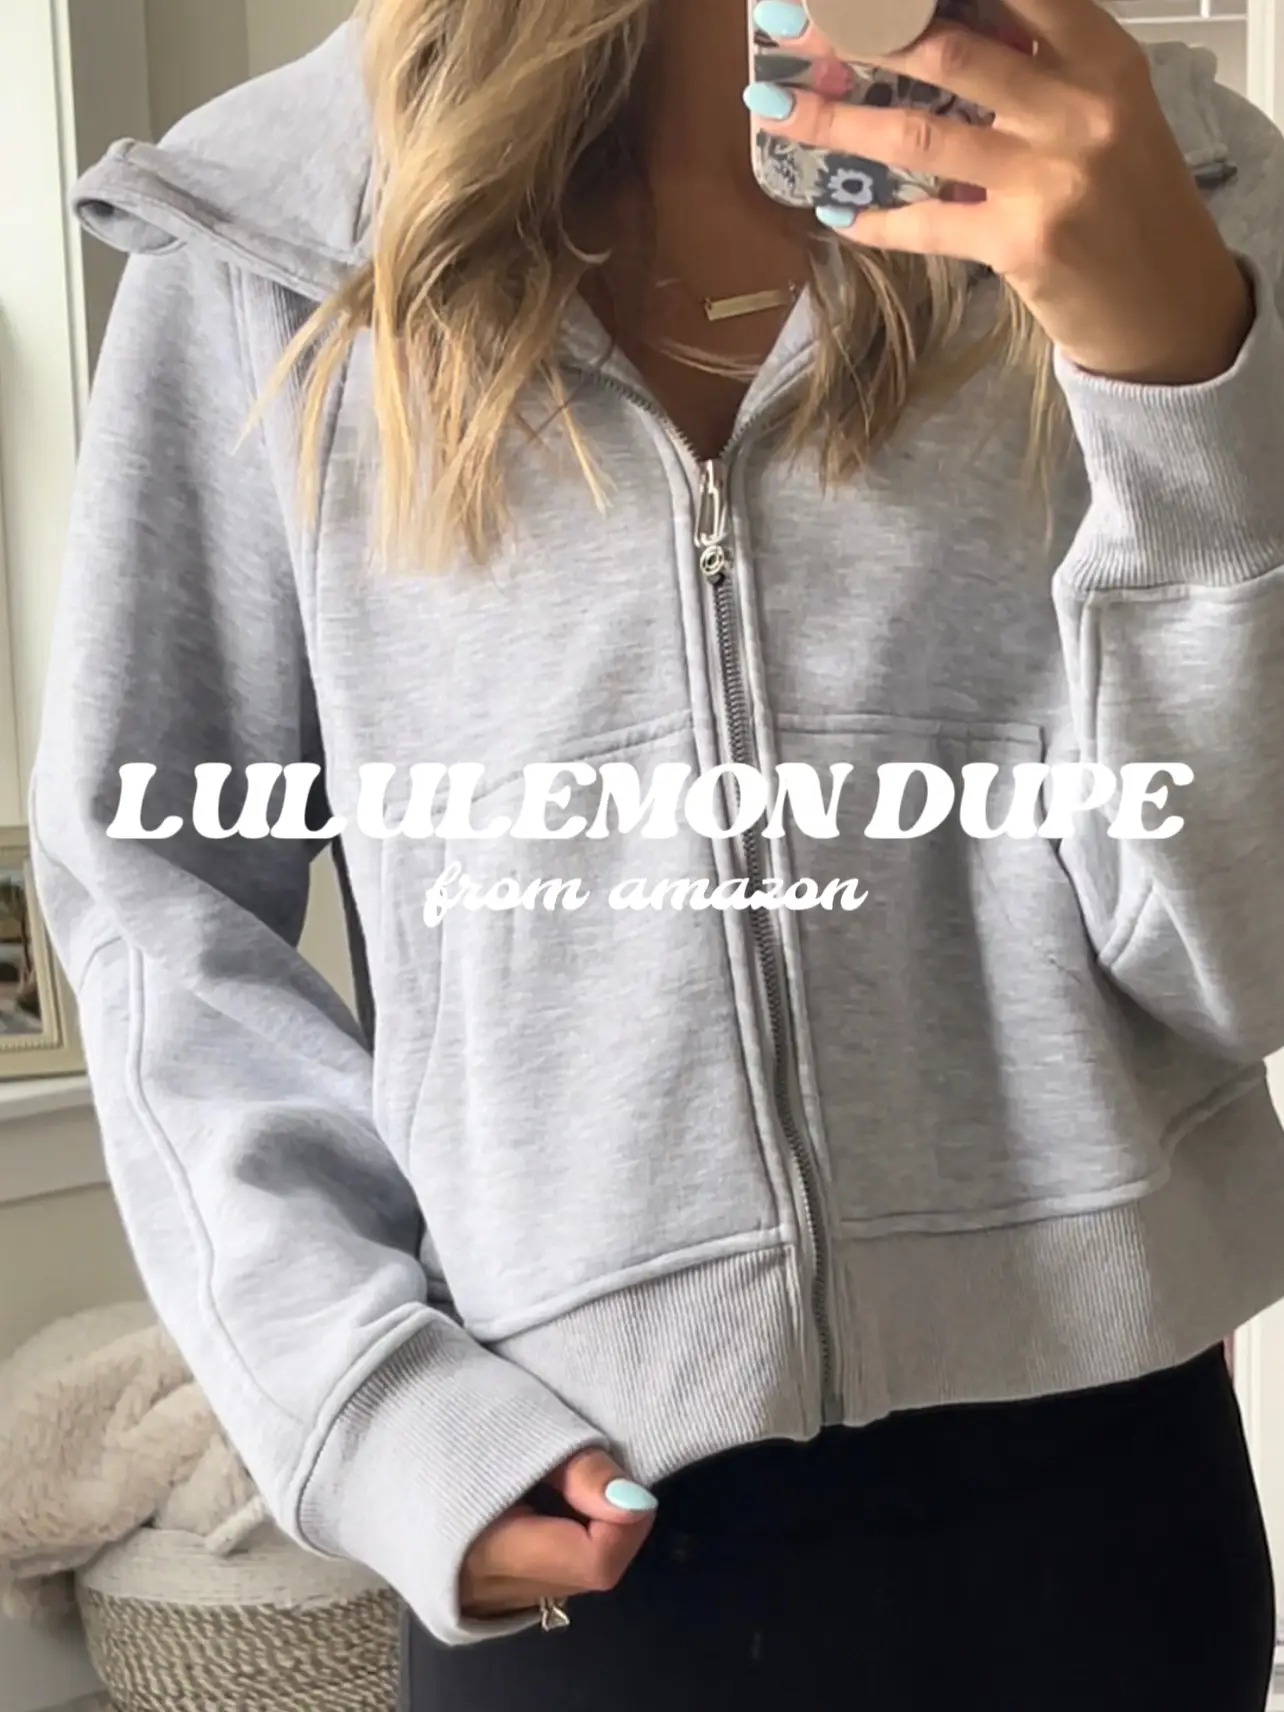 Officially my new favorite Lululemon Full Zip Scuba hoodie dupe on